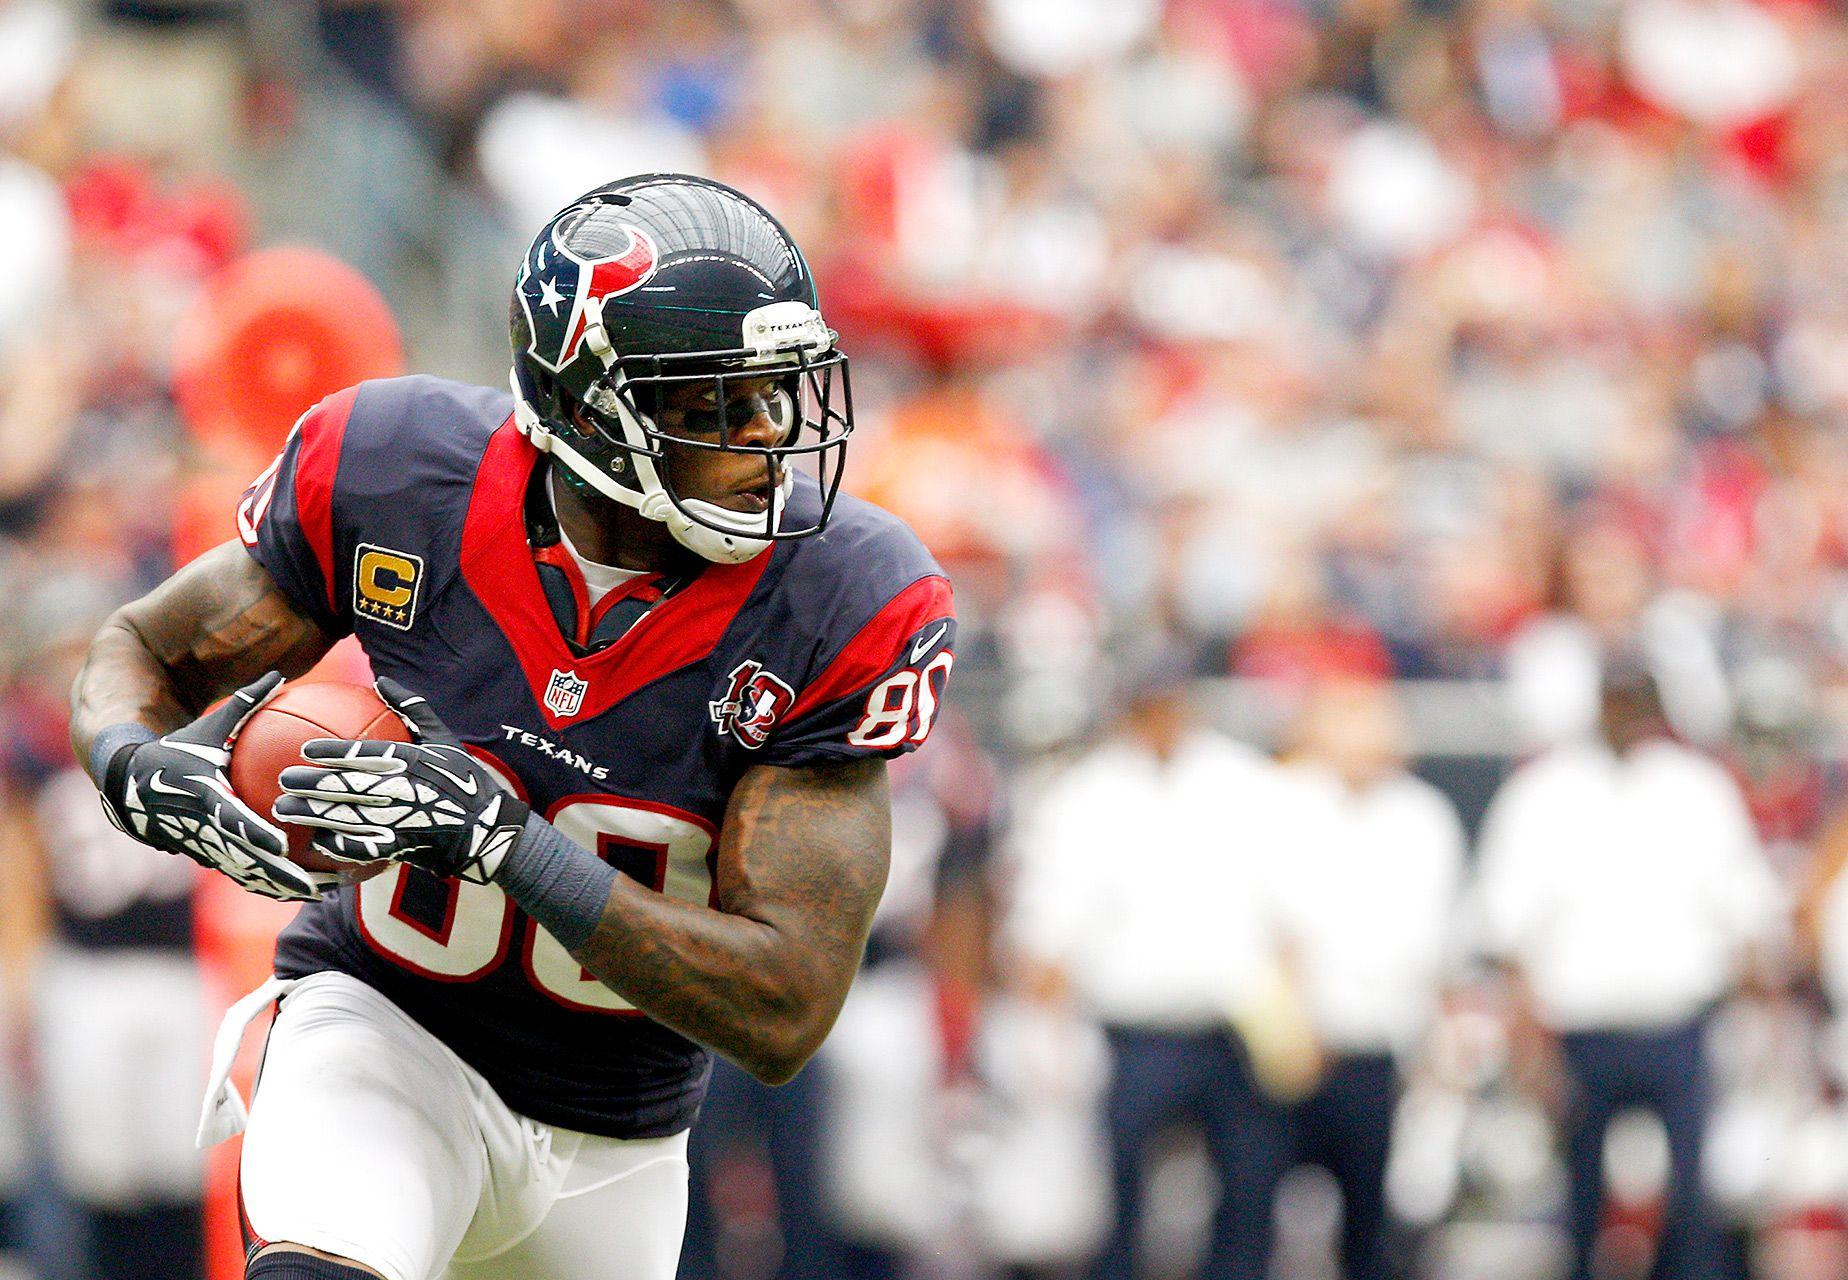 Awesome Andre Johnson Image. Andre Johnson Wallpaper